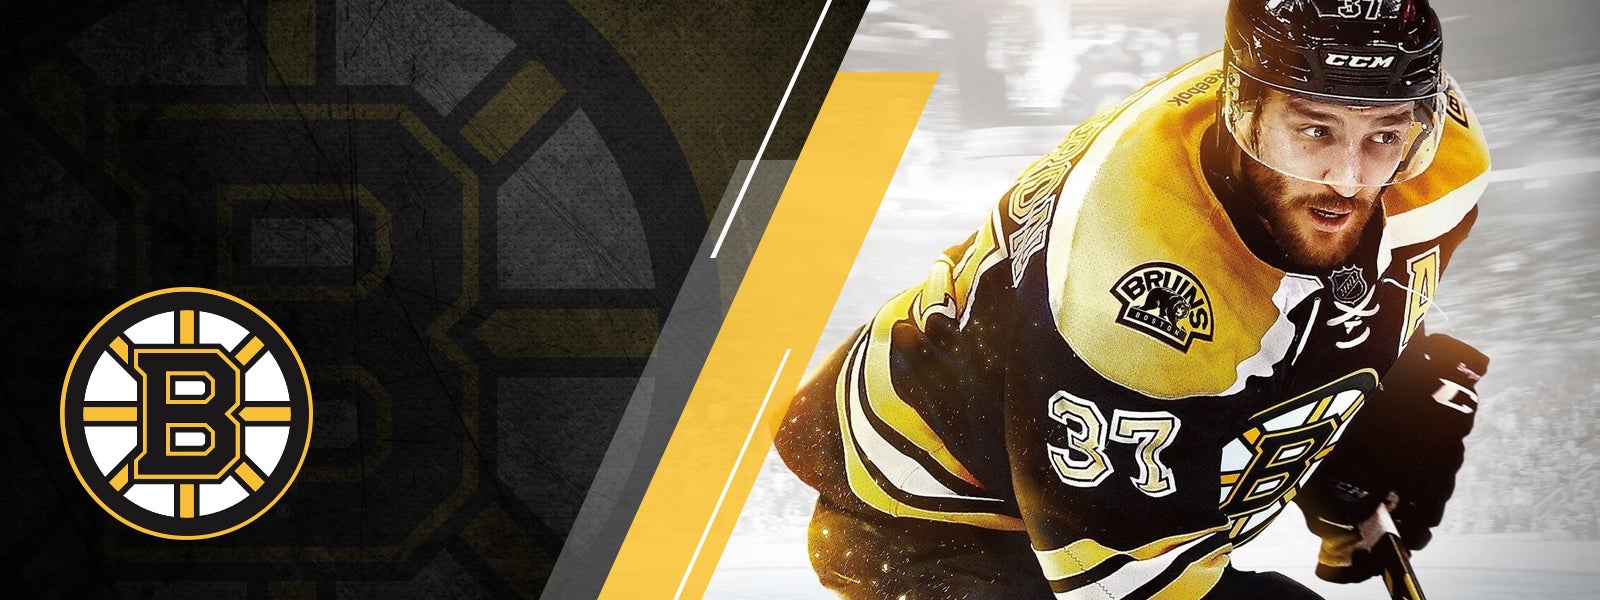 Download “Boston Bruins – the Pride of the Eastern Conference